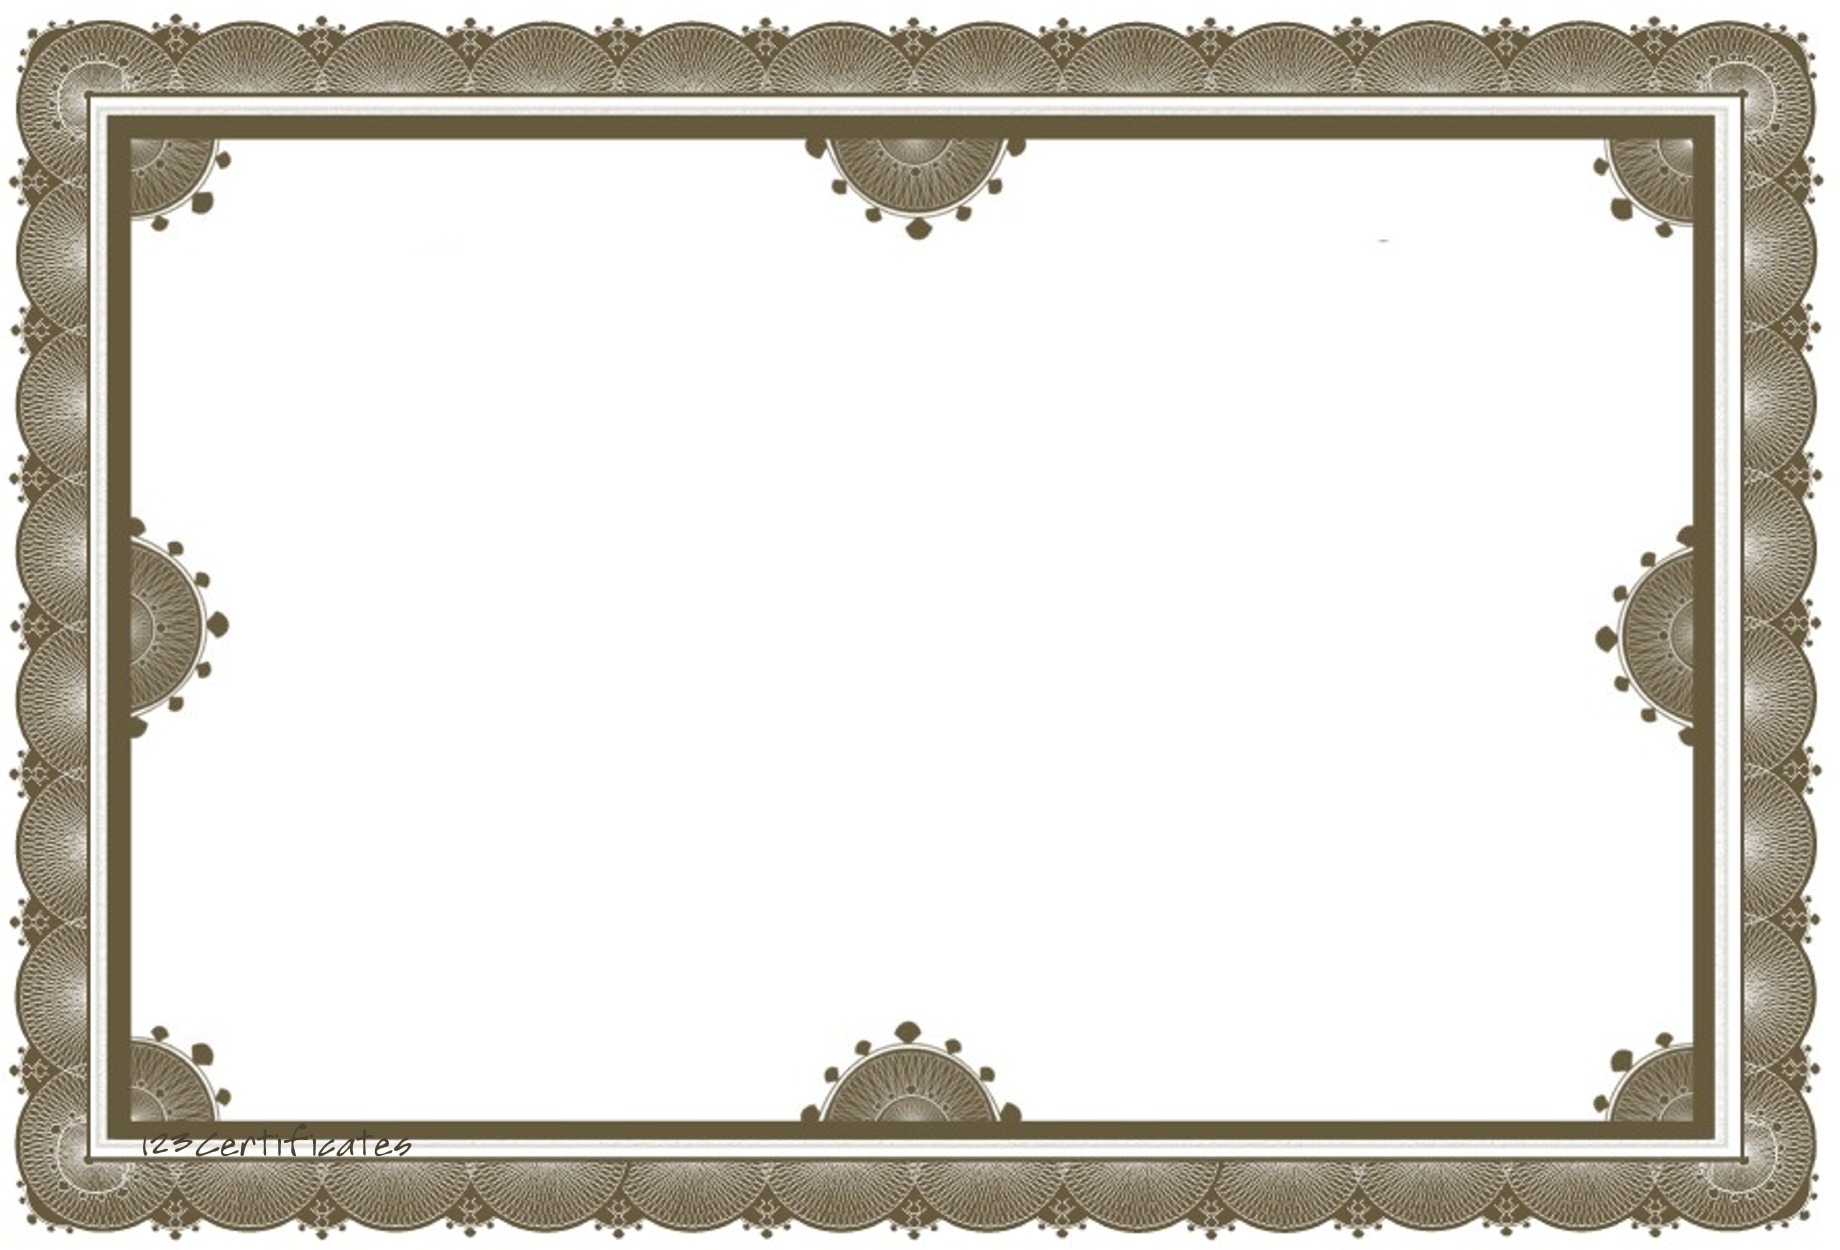 Free Portrait Certificate Border Templates For Word - ClipArt Best